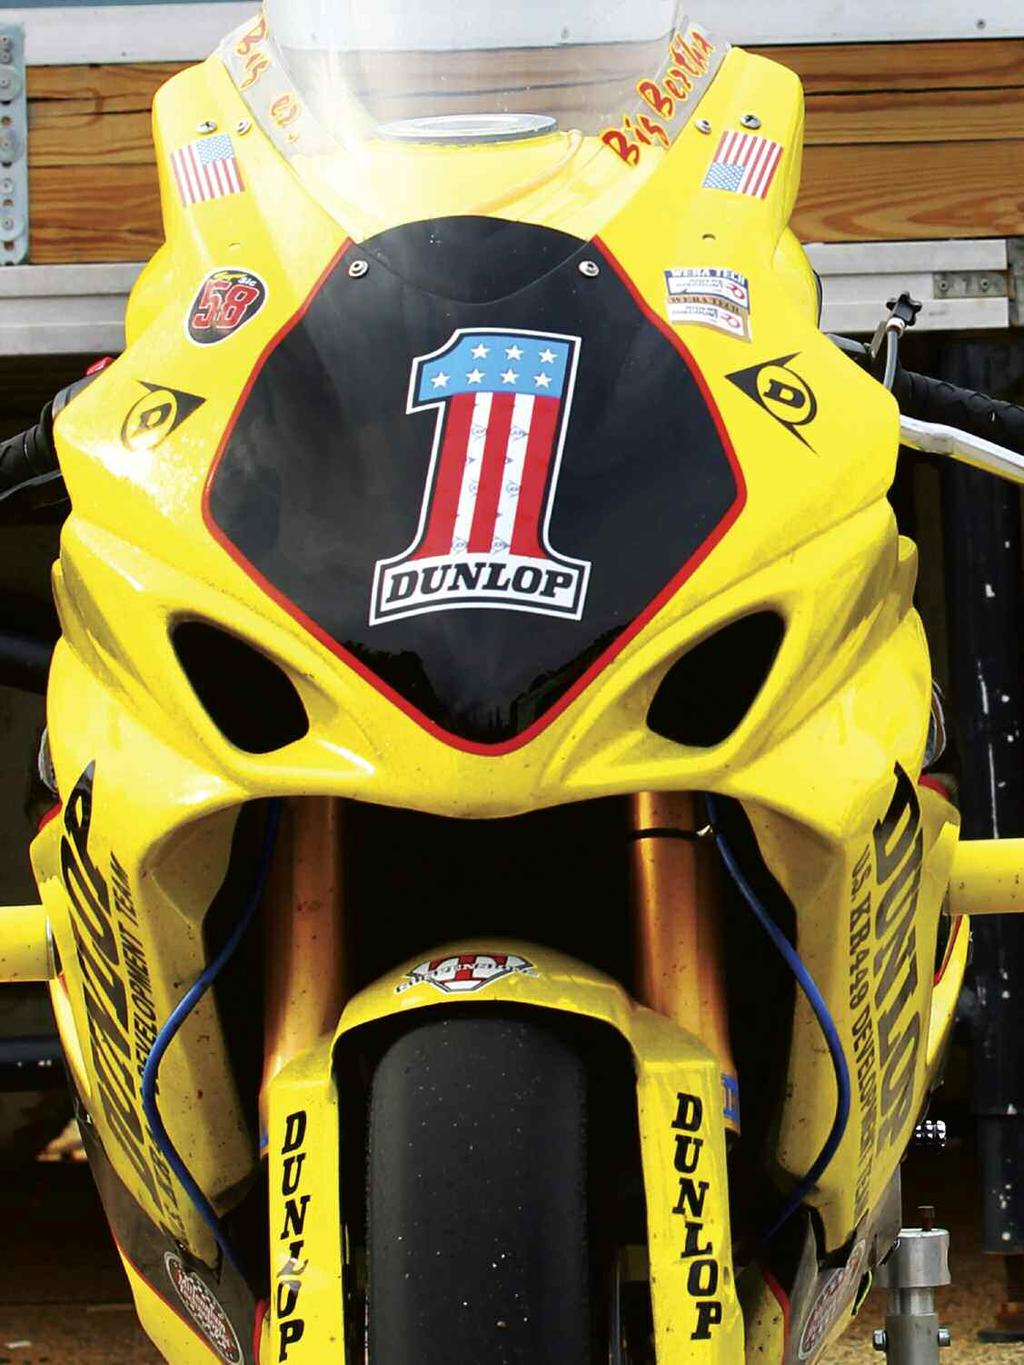 OFF THE GRID DUNLOP TALKS ABOUT CLUB SUPPORT WHERE TOMORROW S AMA PRO CHAMPS ARE BEING GROOMED 34 Dunlop has recently stepped up its efforts to support club racing with the new KR448F and KR449